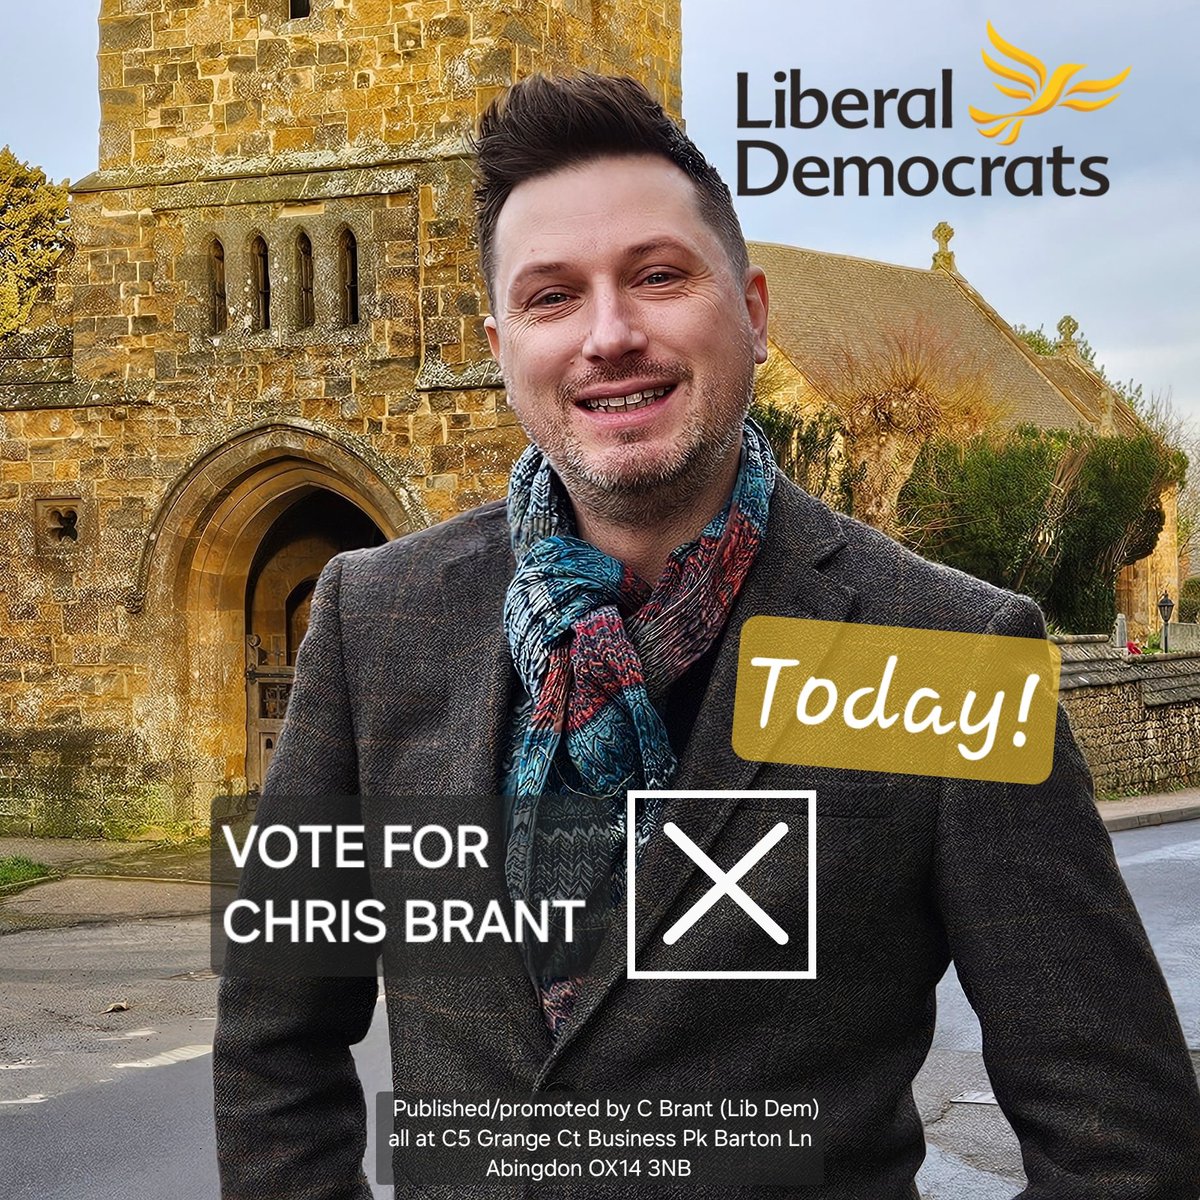 It's #LE2024
Your Polling Station is open from 7am to 10pm to vote in the Cherwell District Council Election.

Please vote for me to become your new local Councillor here in the Cropredy, Sibfords & Wroxton Ward

Remember to take your valid ID with you when voting

Thank you 🧡